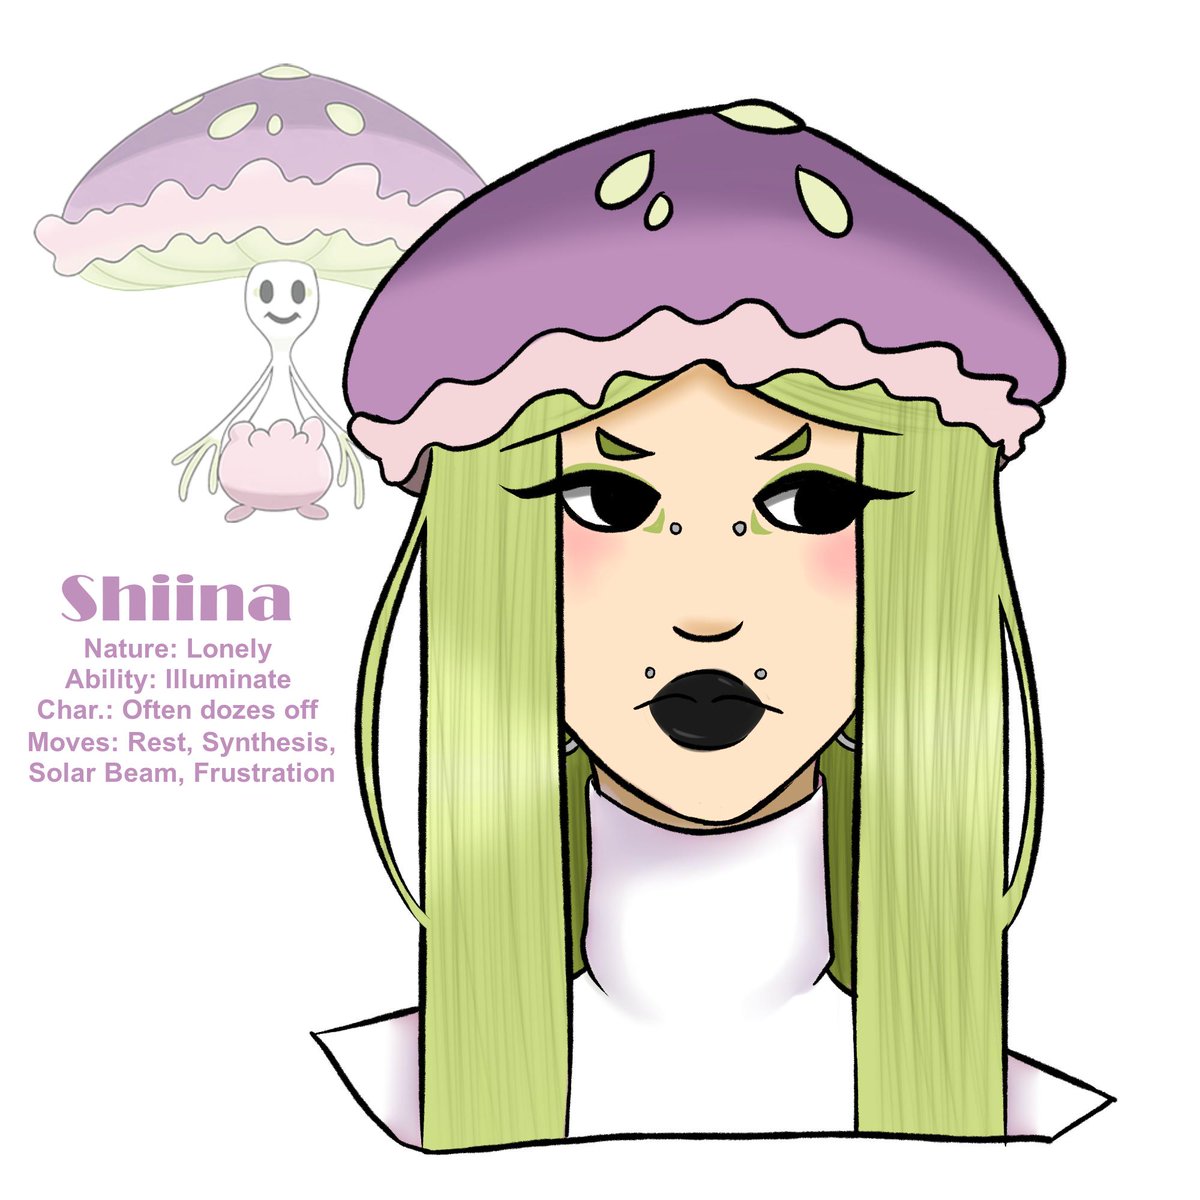 7. Shiina, Shiinotic gijinka. Works at the same shop as Mar as a tattoo artist and piercer. She's quiet but sassy, and really just wants someone to dote on her. Very sleepy, and can get cranky at times. Loves her sibling Mar very much but thinks they're dumb as hel